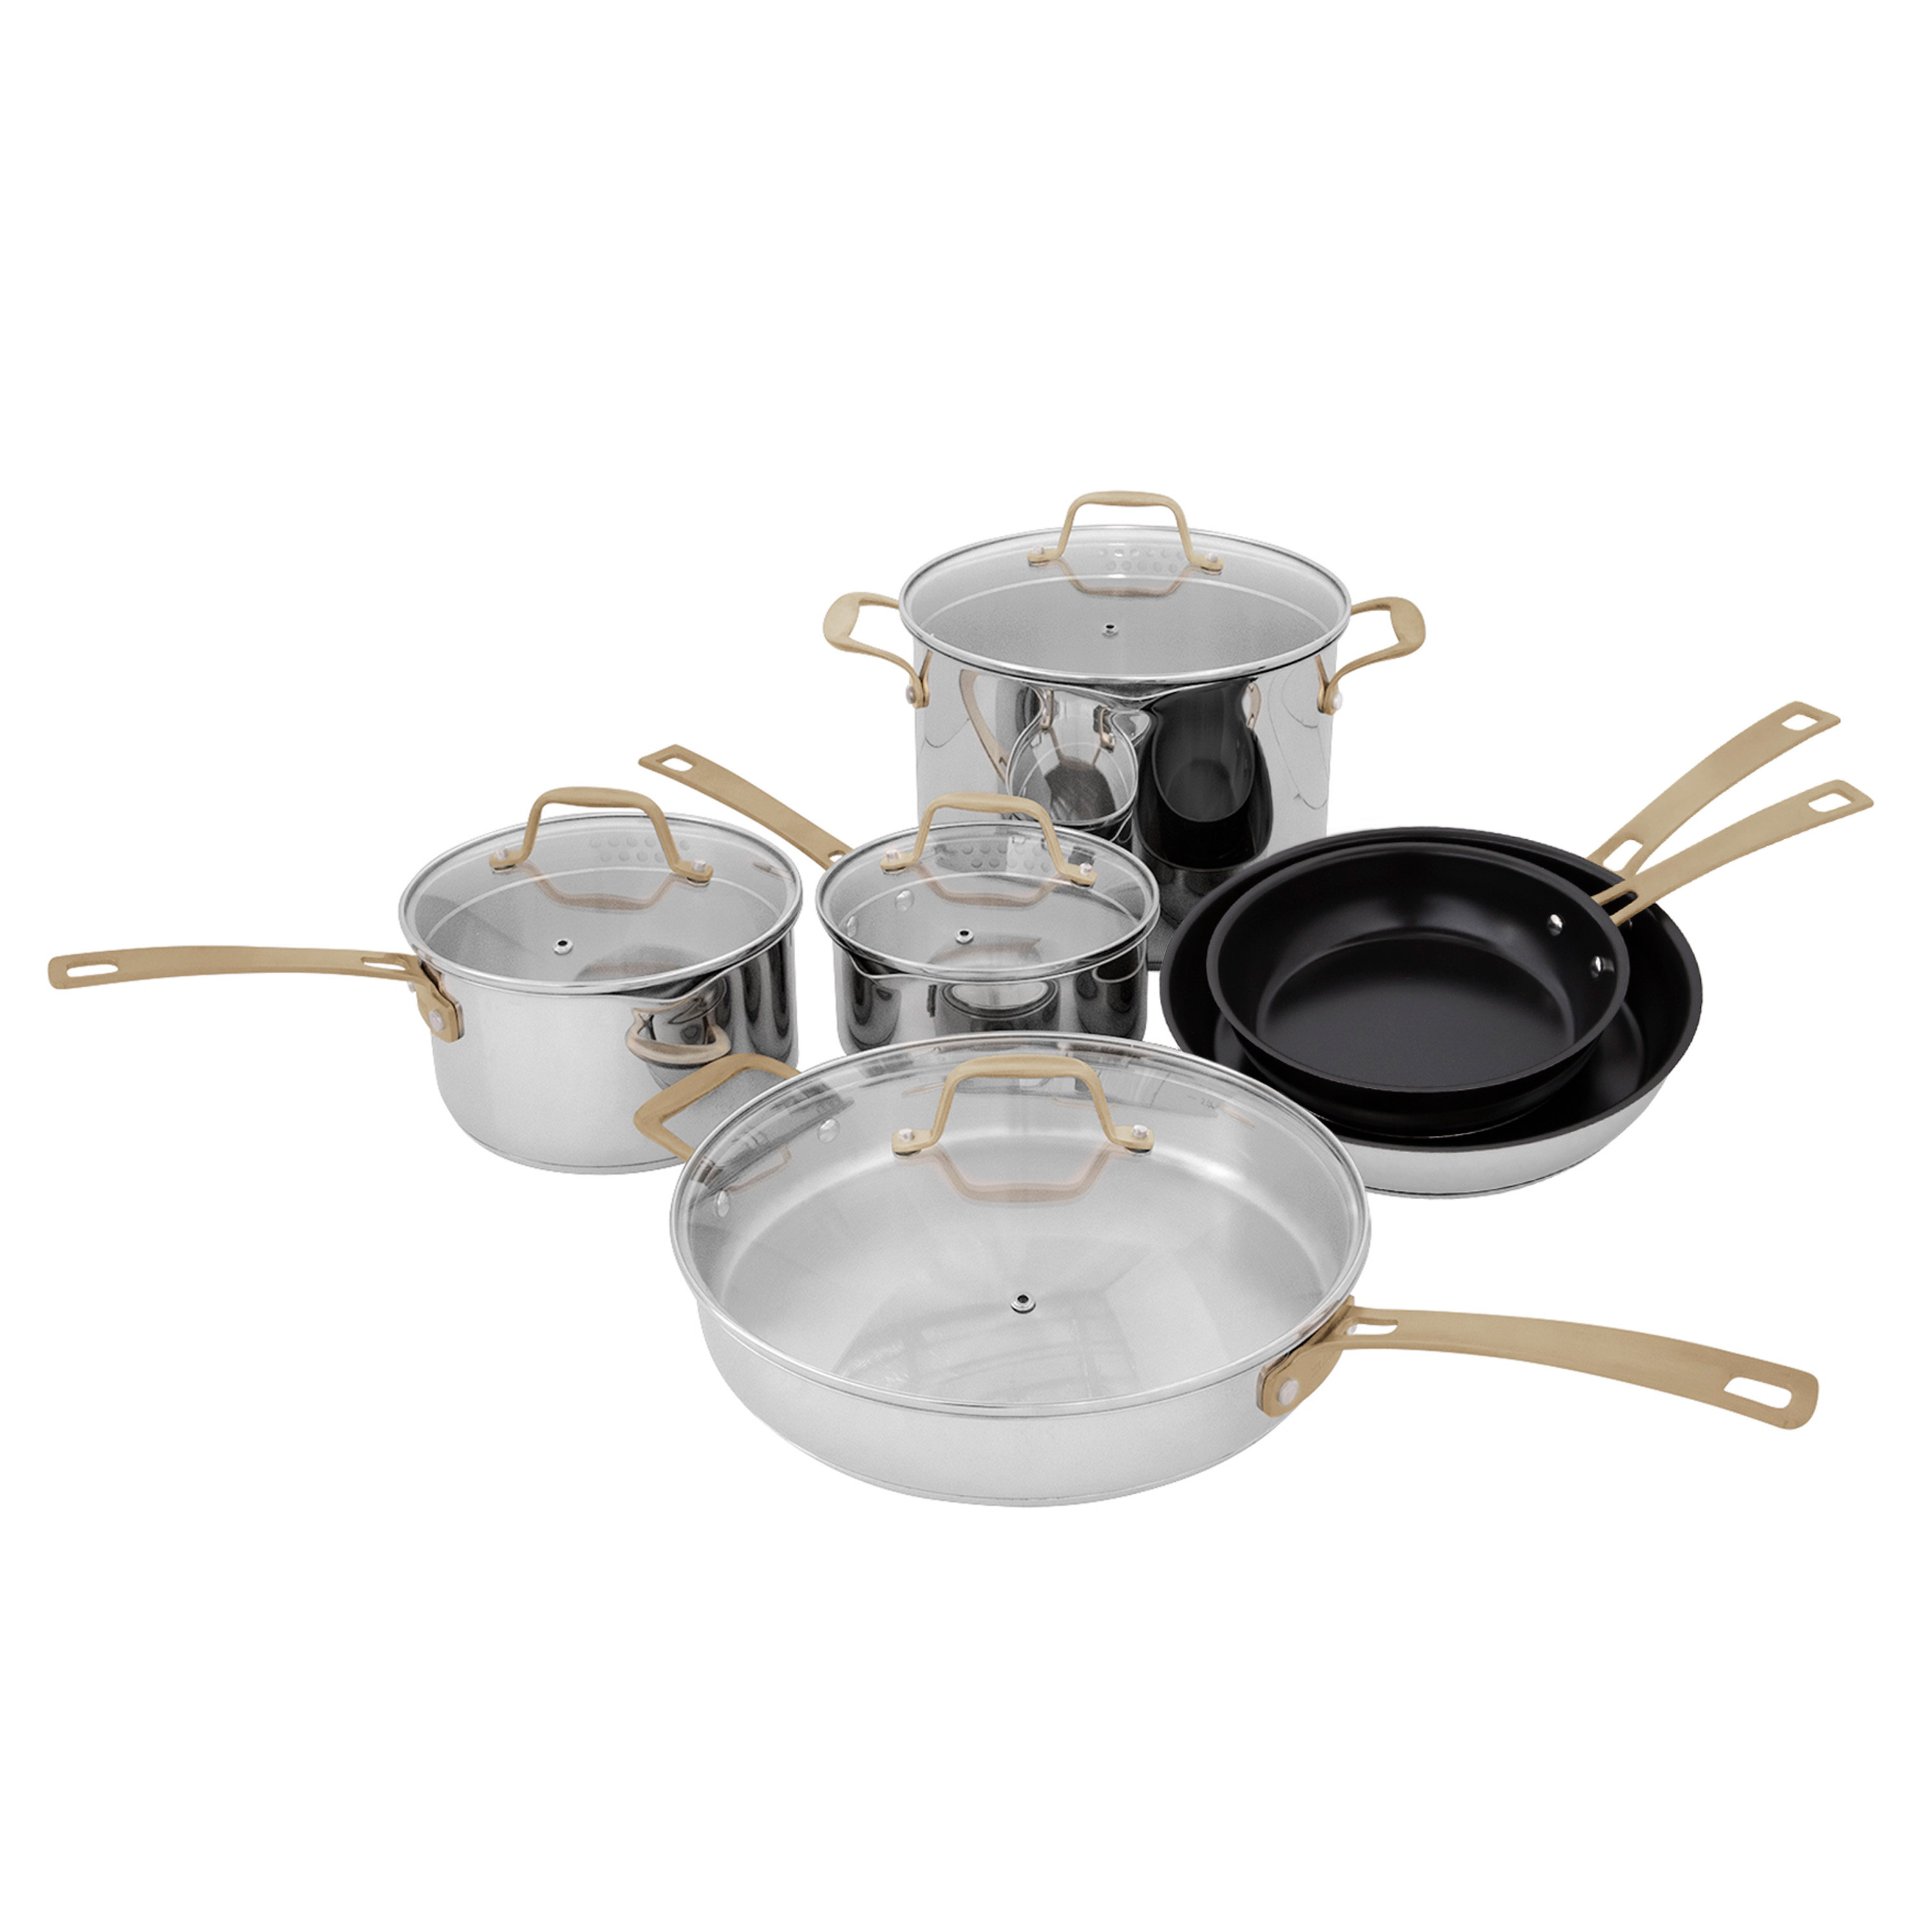 URBN-CHEF Ceramic Rose Gold Induction Cooking Pots Pans Frying Pan